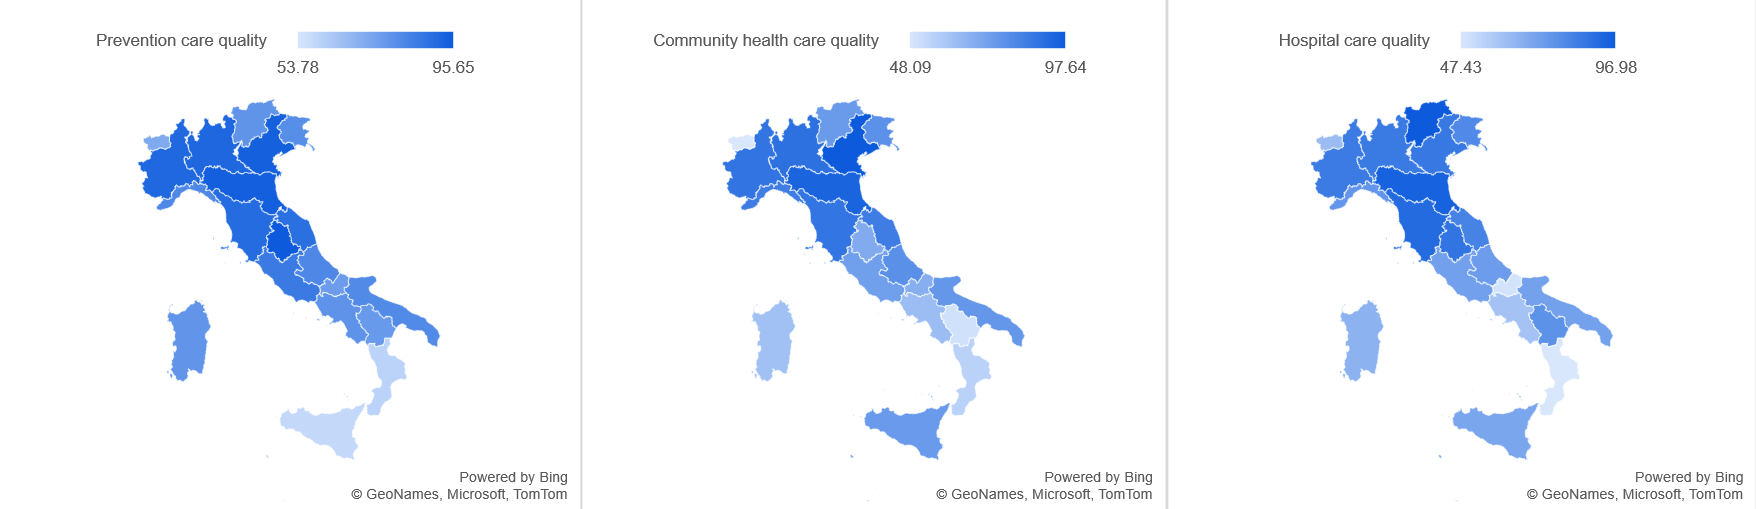 Regional variation in the quality of healthcare in Italy for Prevention, Community, and Hospital based settings